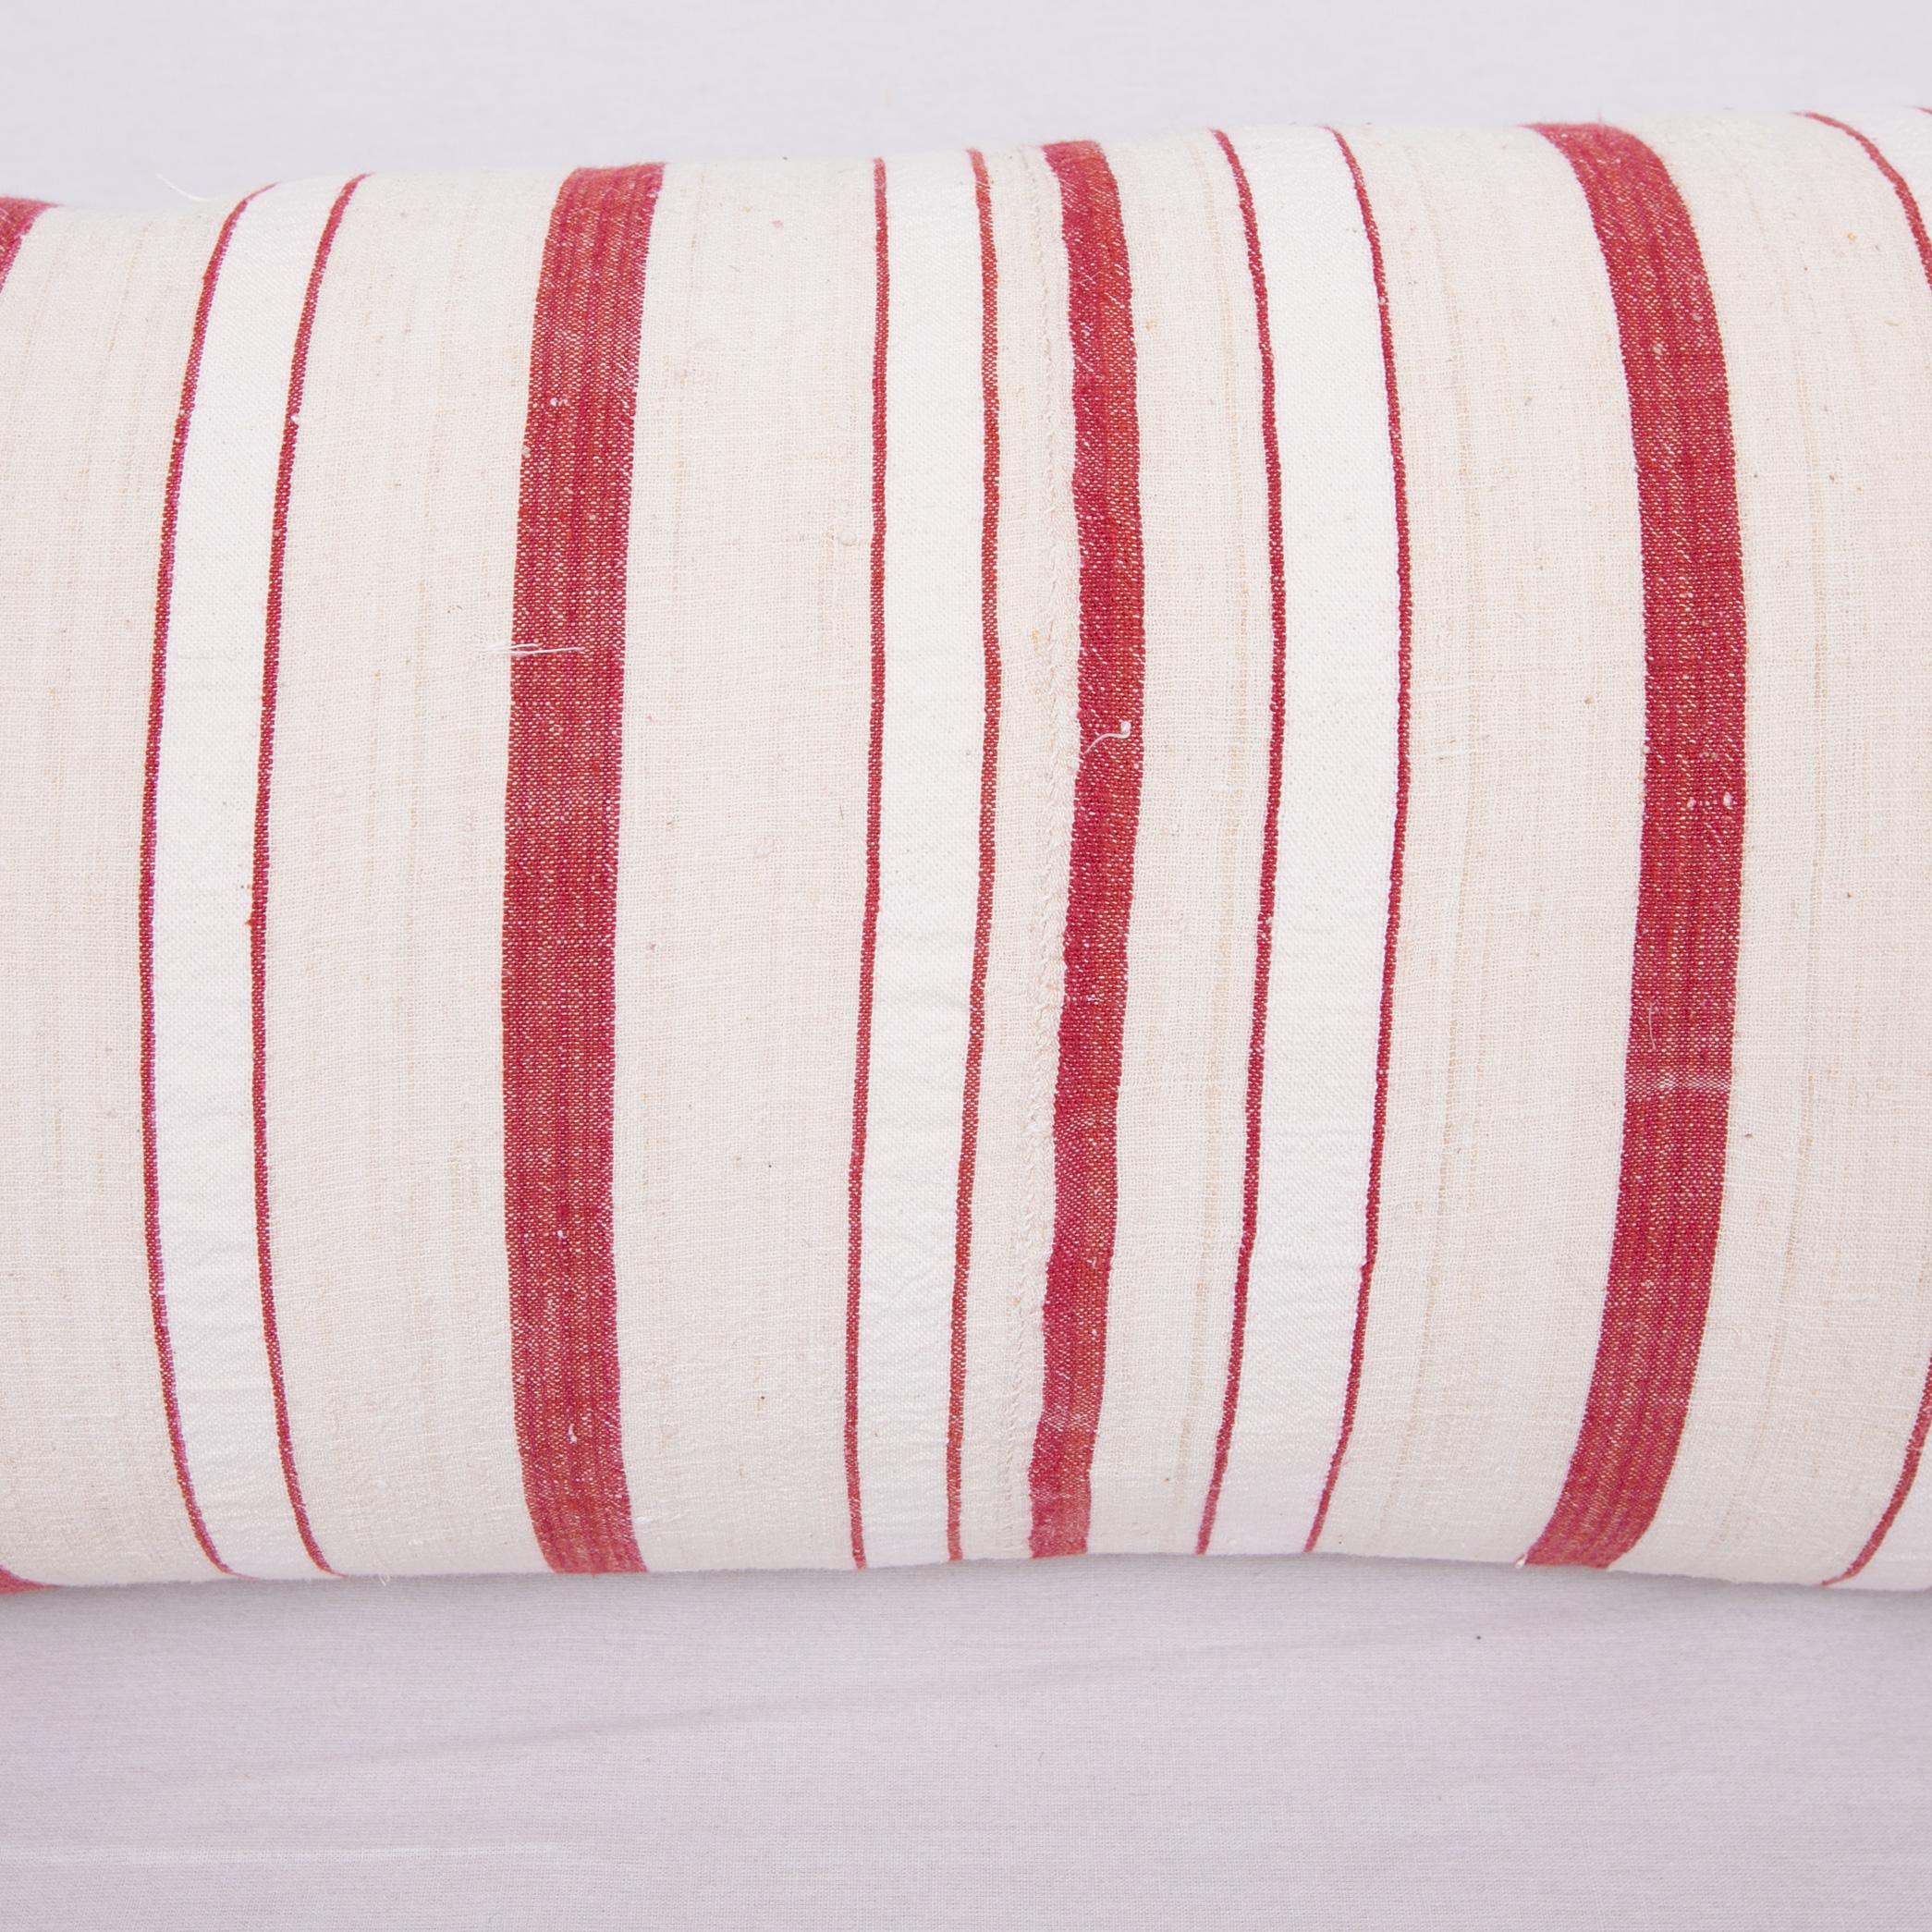 Rustic Pillow Case Fashioned from an Anatolian Vintage Cotton Fabric, 1960s